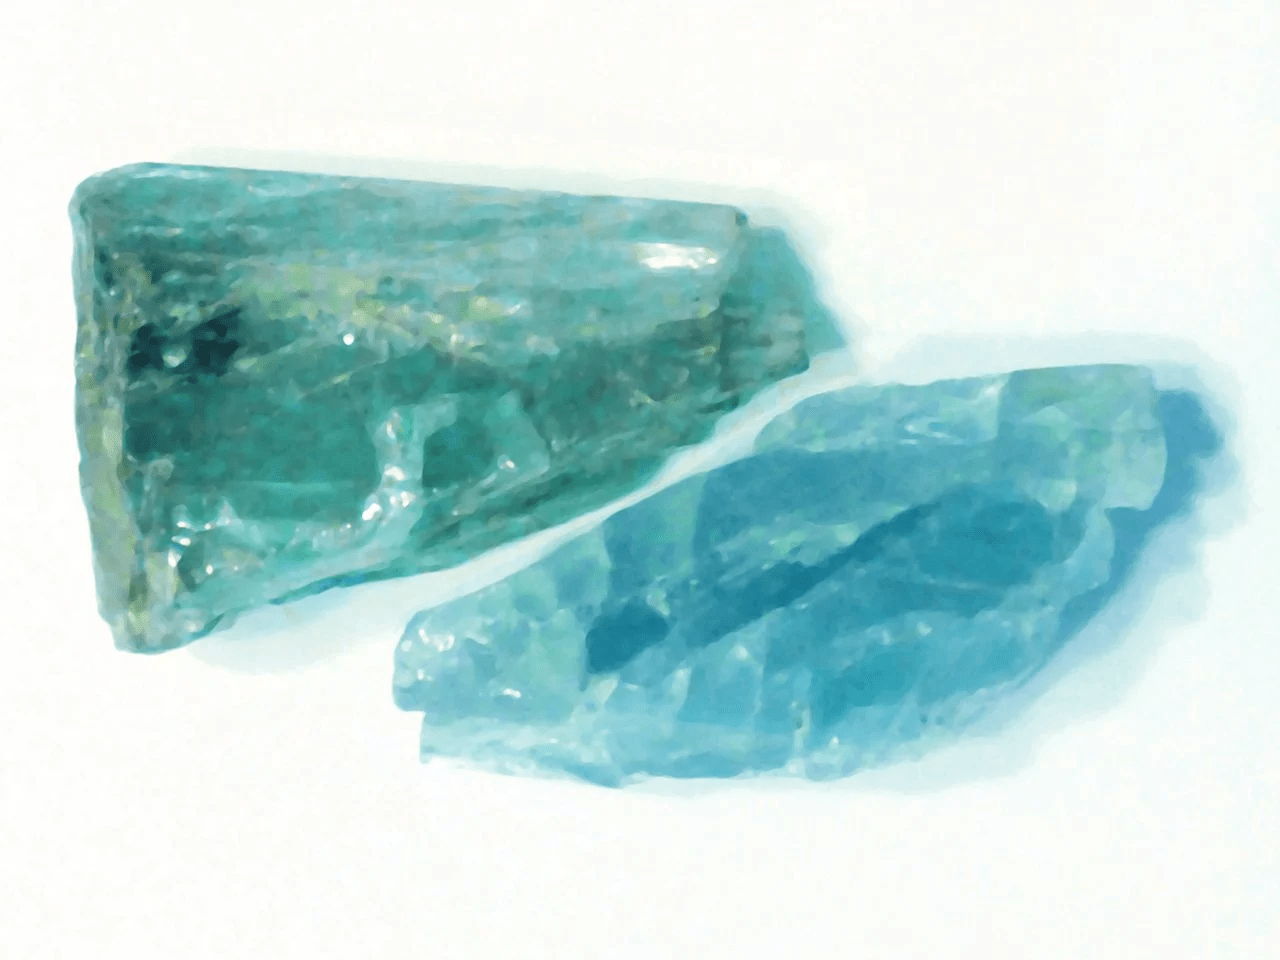 7-Fragements-of-the-same-aquamarine-crystal-before-and-after-heating (1).png